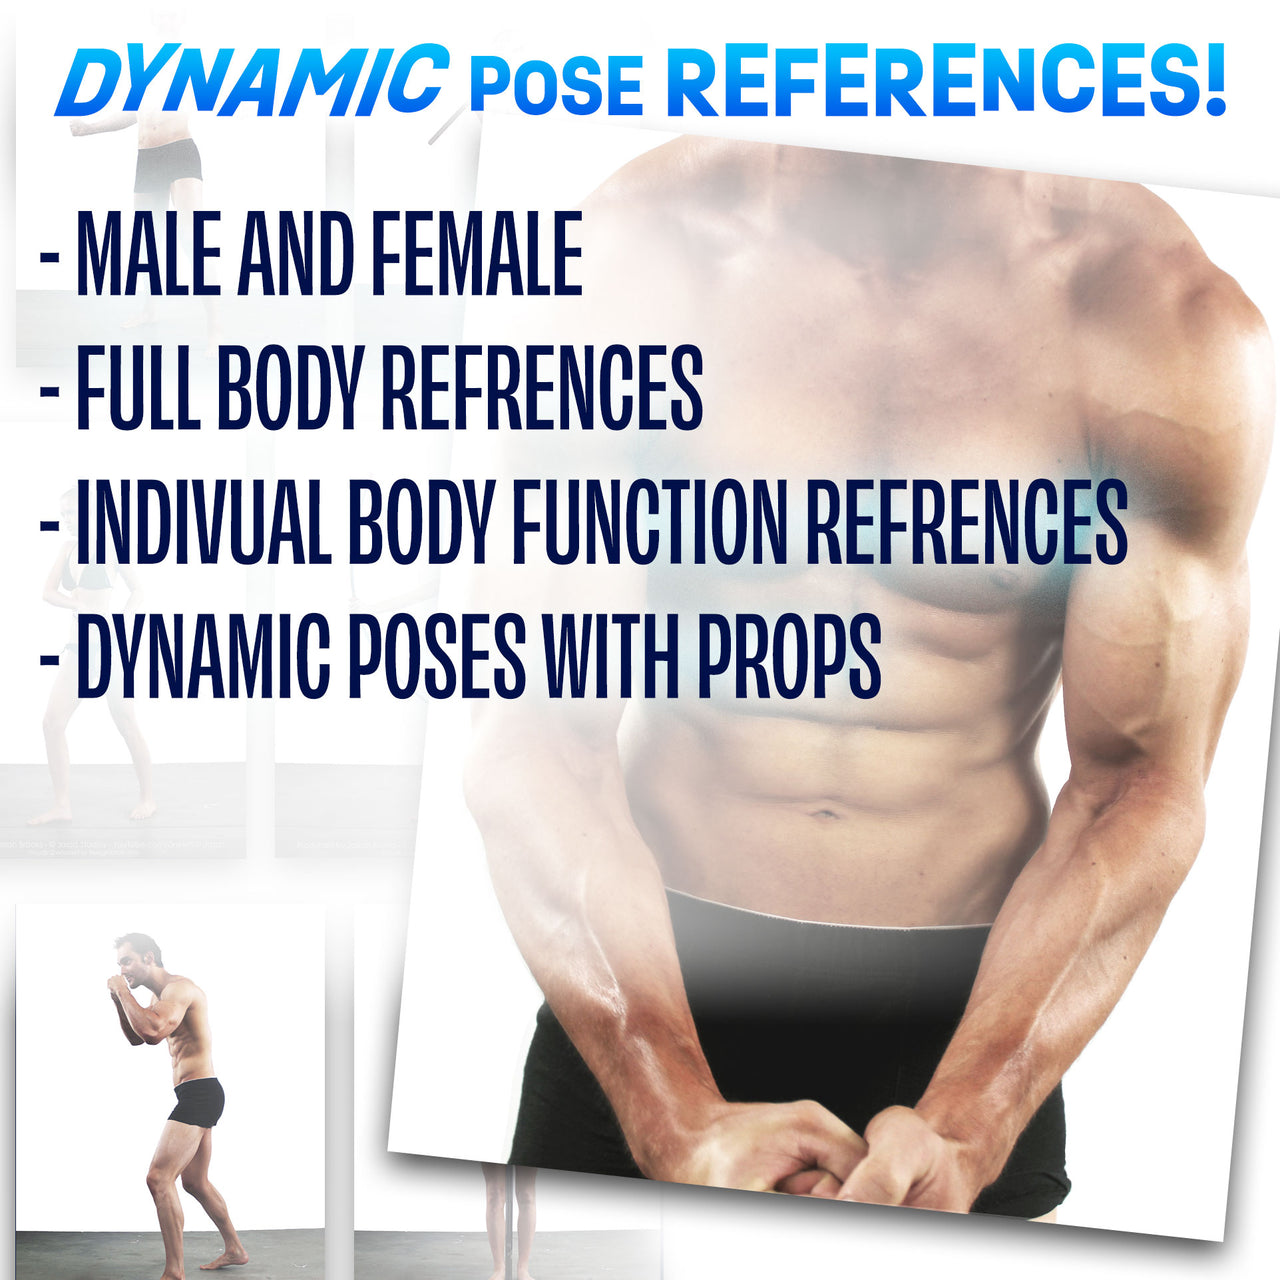 The Anatomy Reference Pack